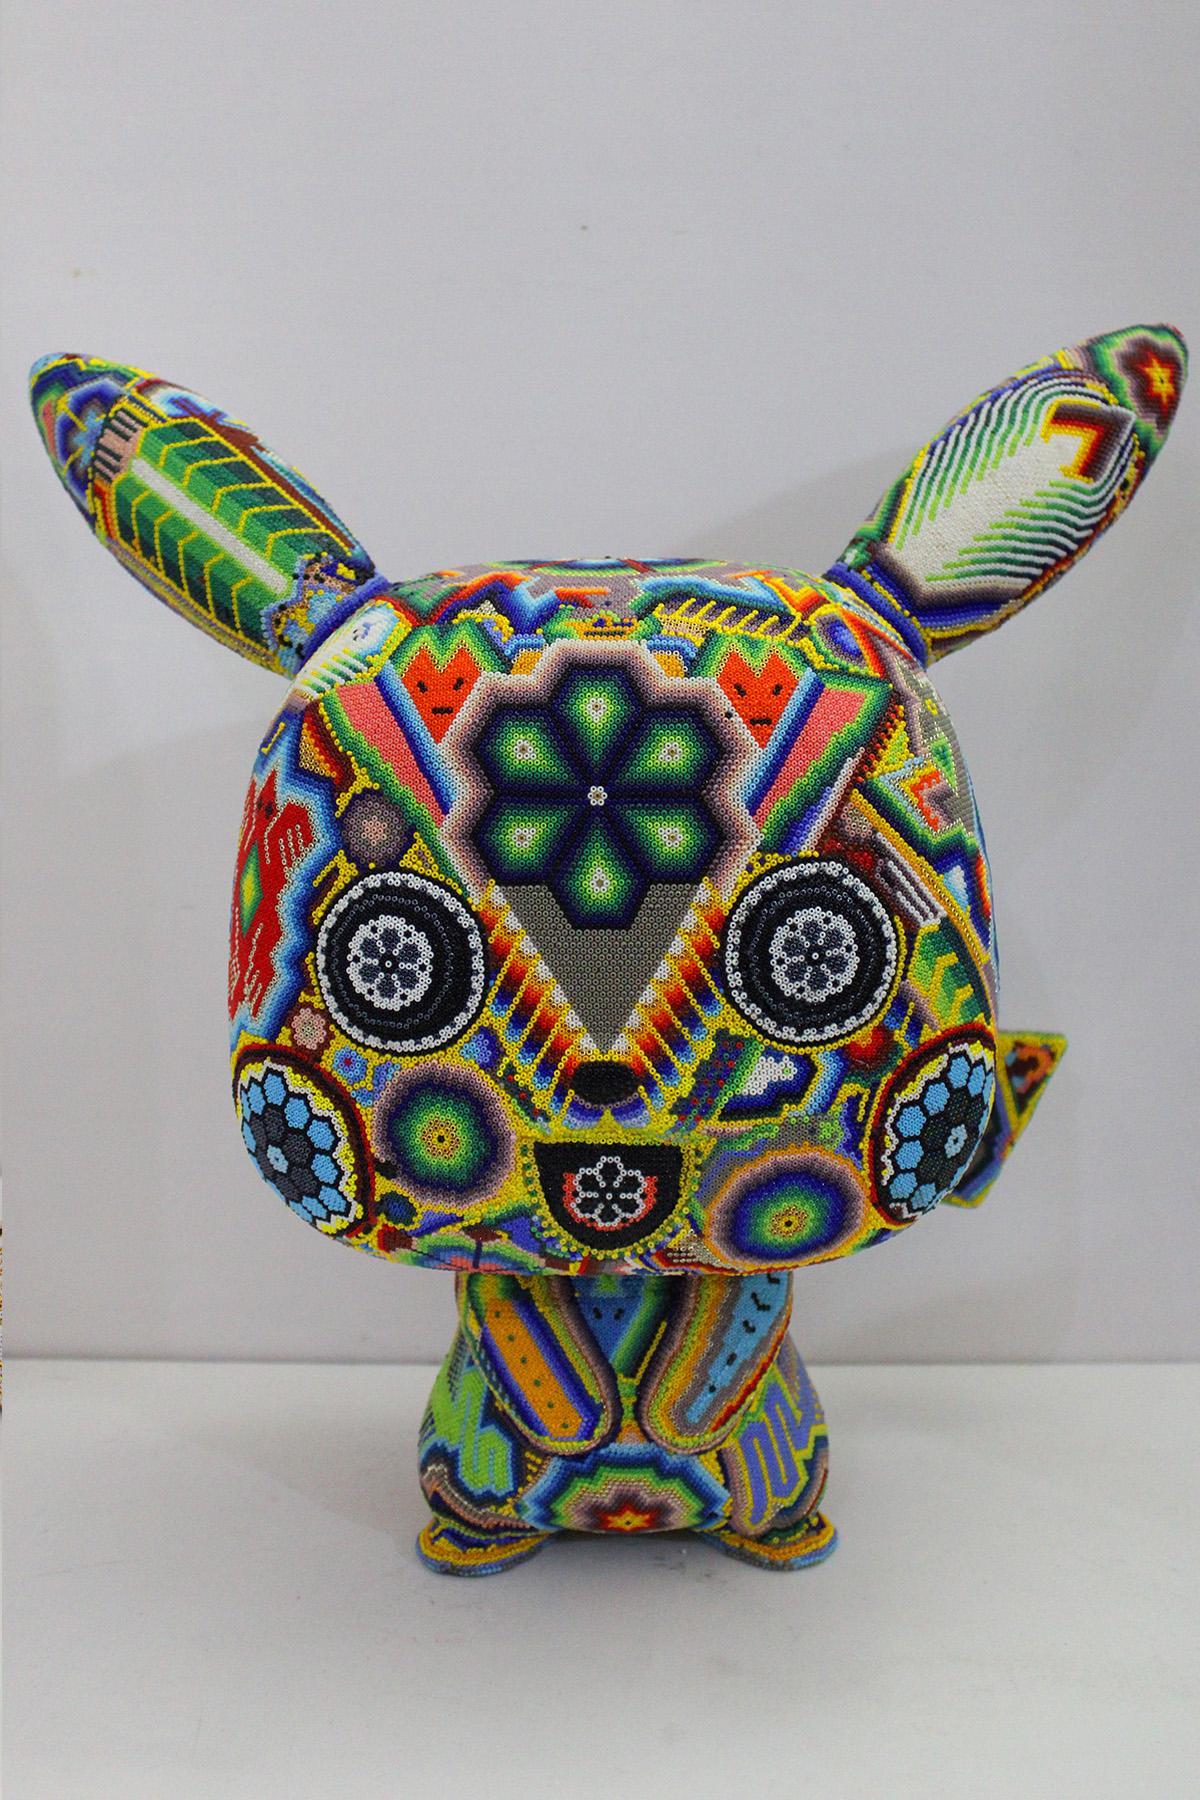 CHROMA aka Rick Wolfryd  Abstract Sculpture - "Big Boy" from Huichol ALTERATIONS Series 